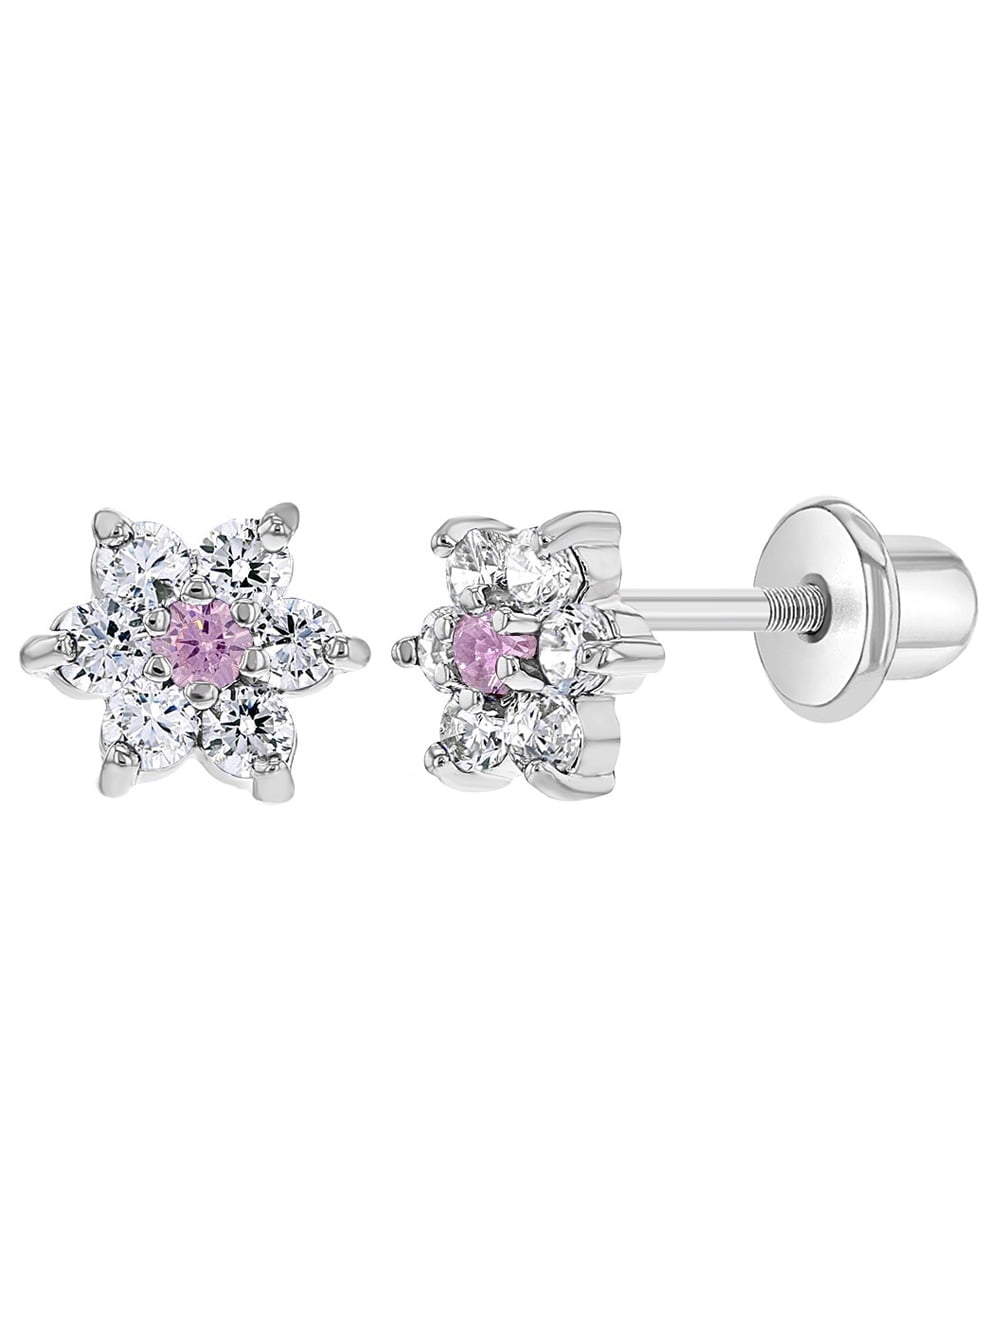 Details about   White CZ Earrings 14K Gold Cubic Zirconia Children Studs Delicate Flower Gifts 